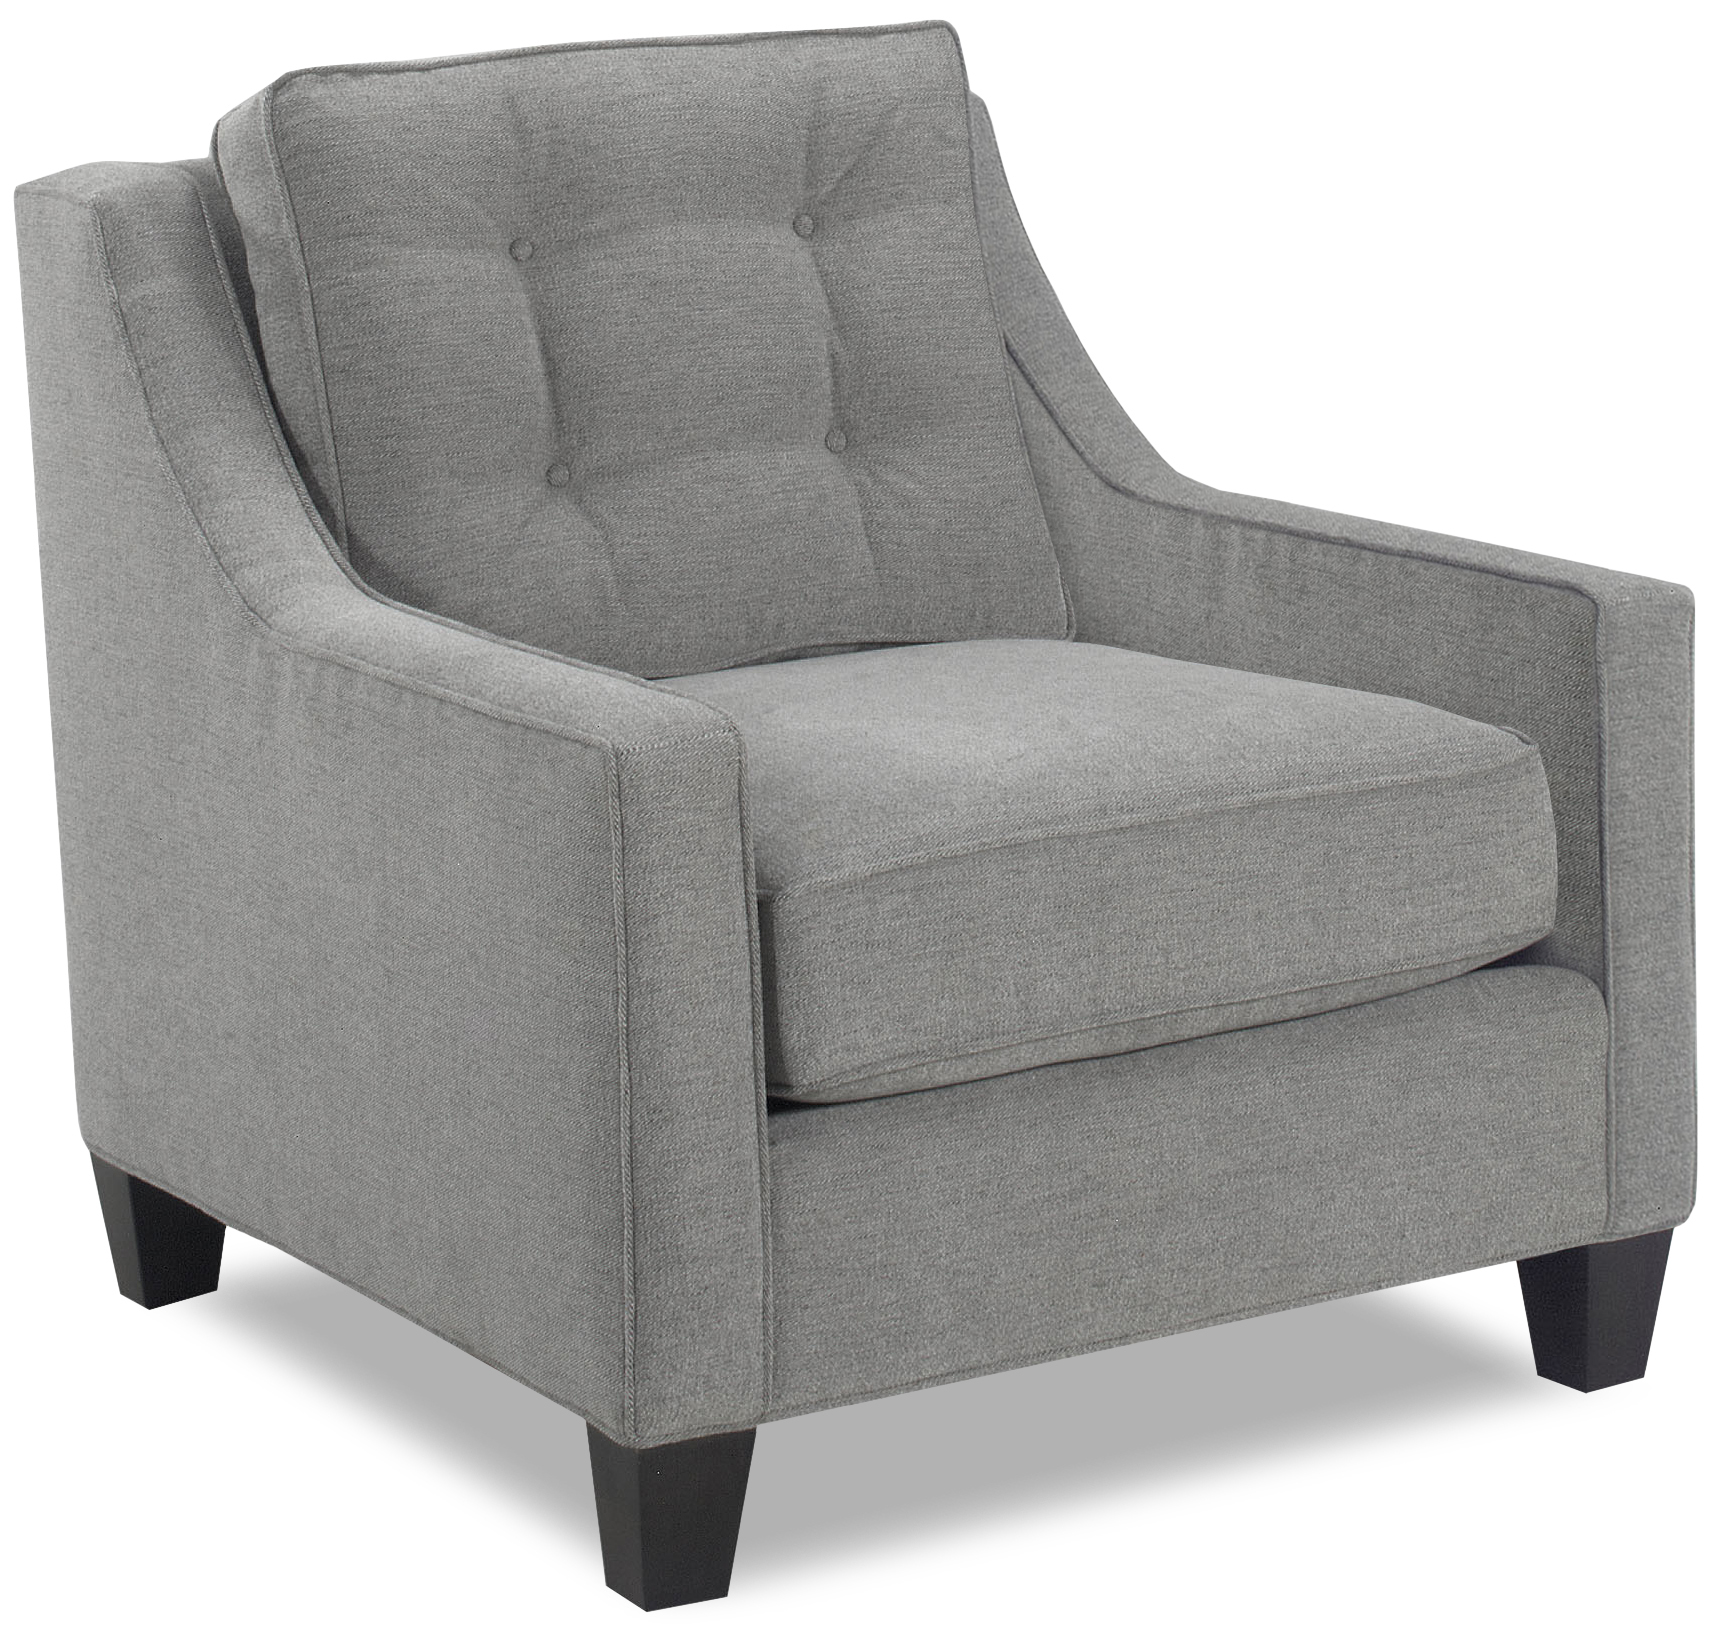 Temple Furniture 5205 Brody Chair